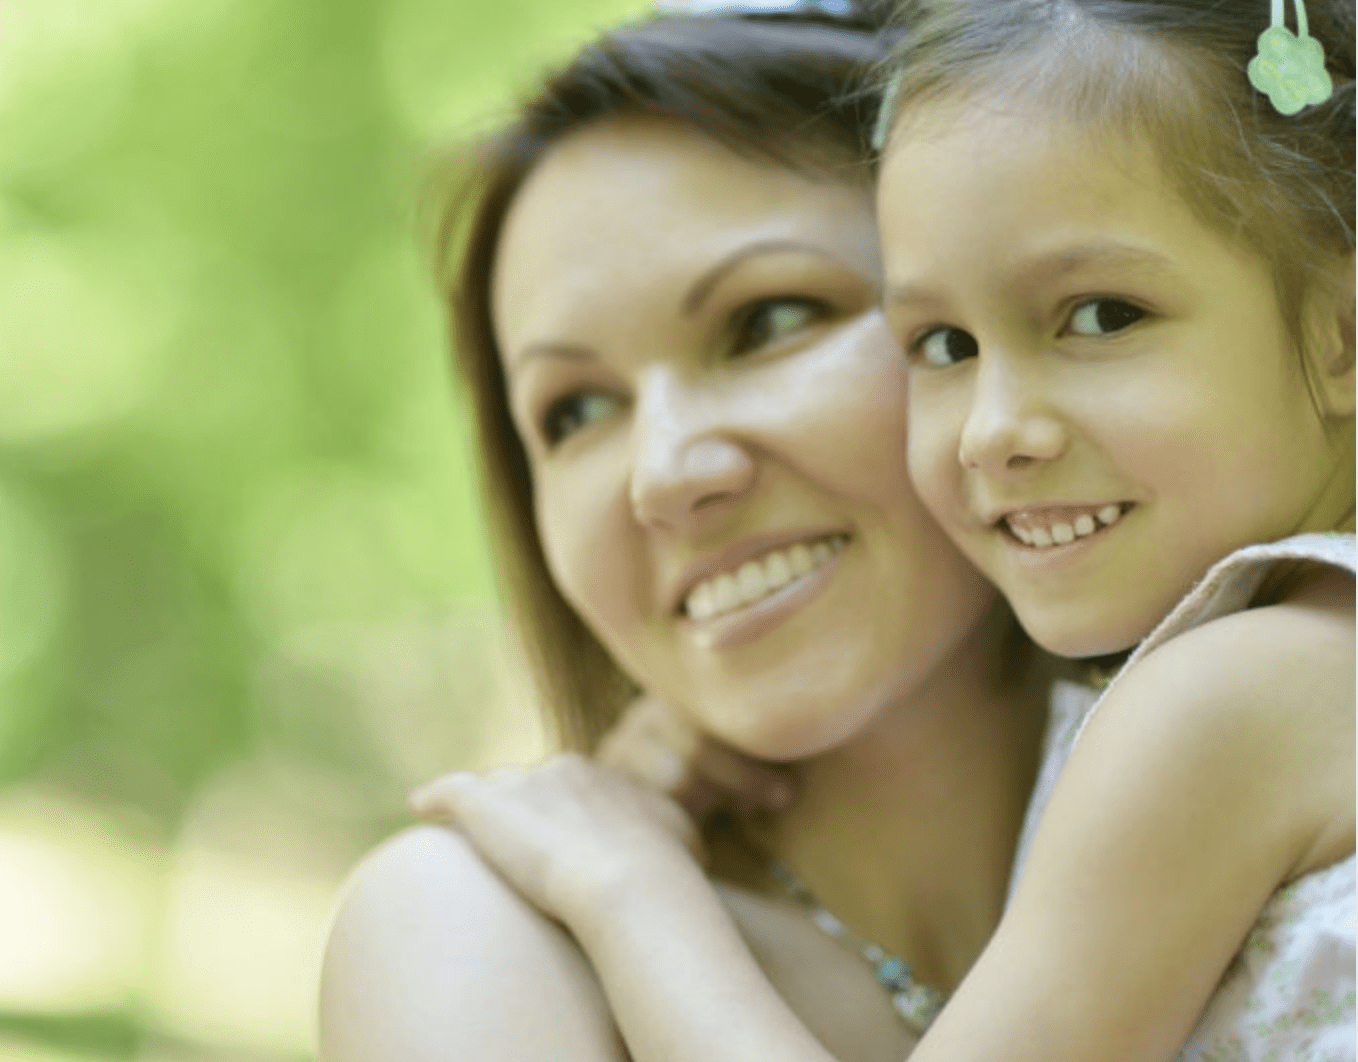 Mother and daughter hugging with green blurry background